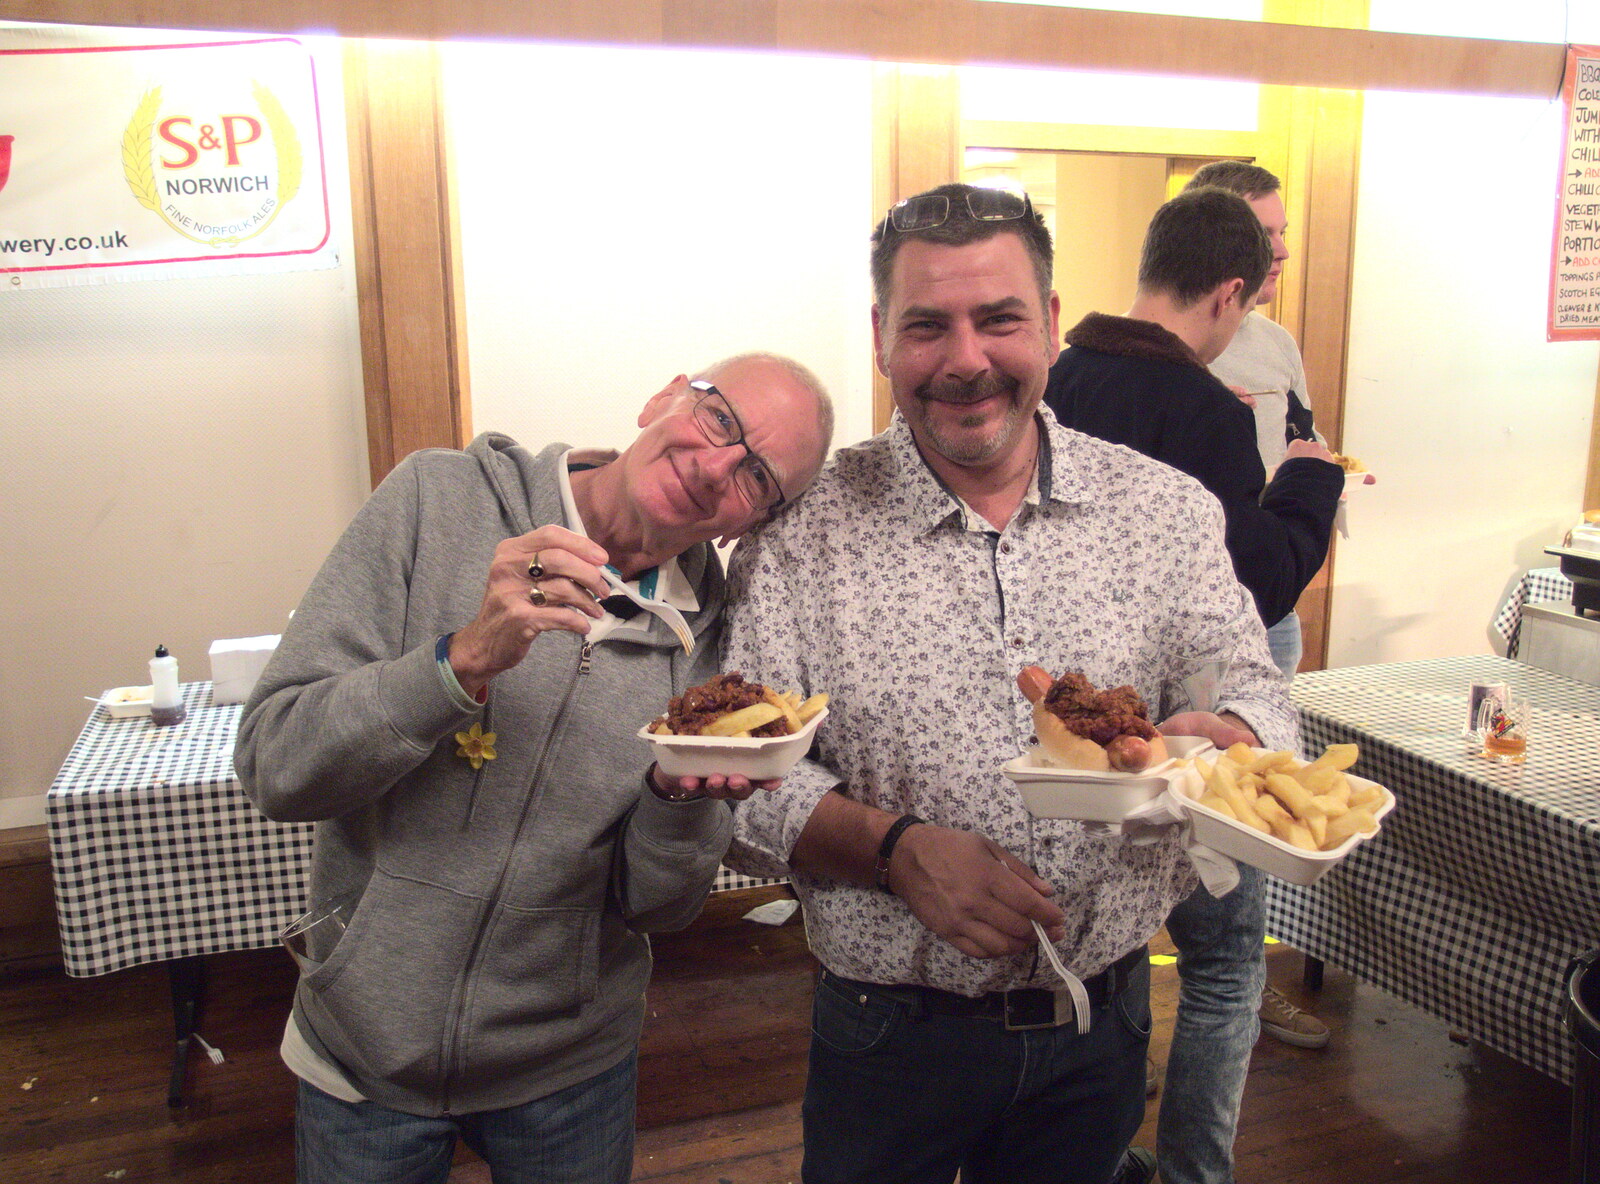 John Willy and Neil get a snack in from The Norwich Beer Festival, St. Andrew's Hall, Norwich, Norfolk - 26th October 2016